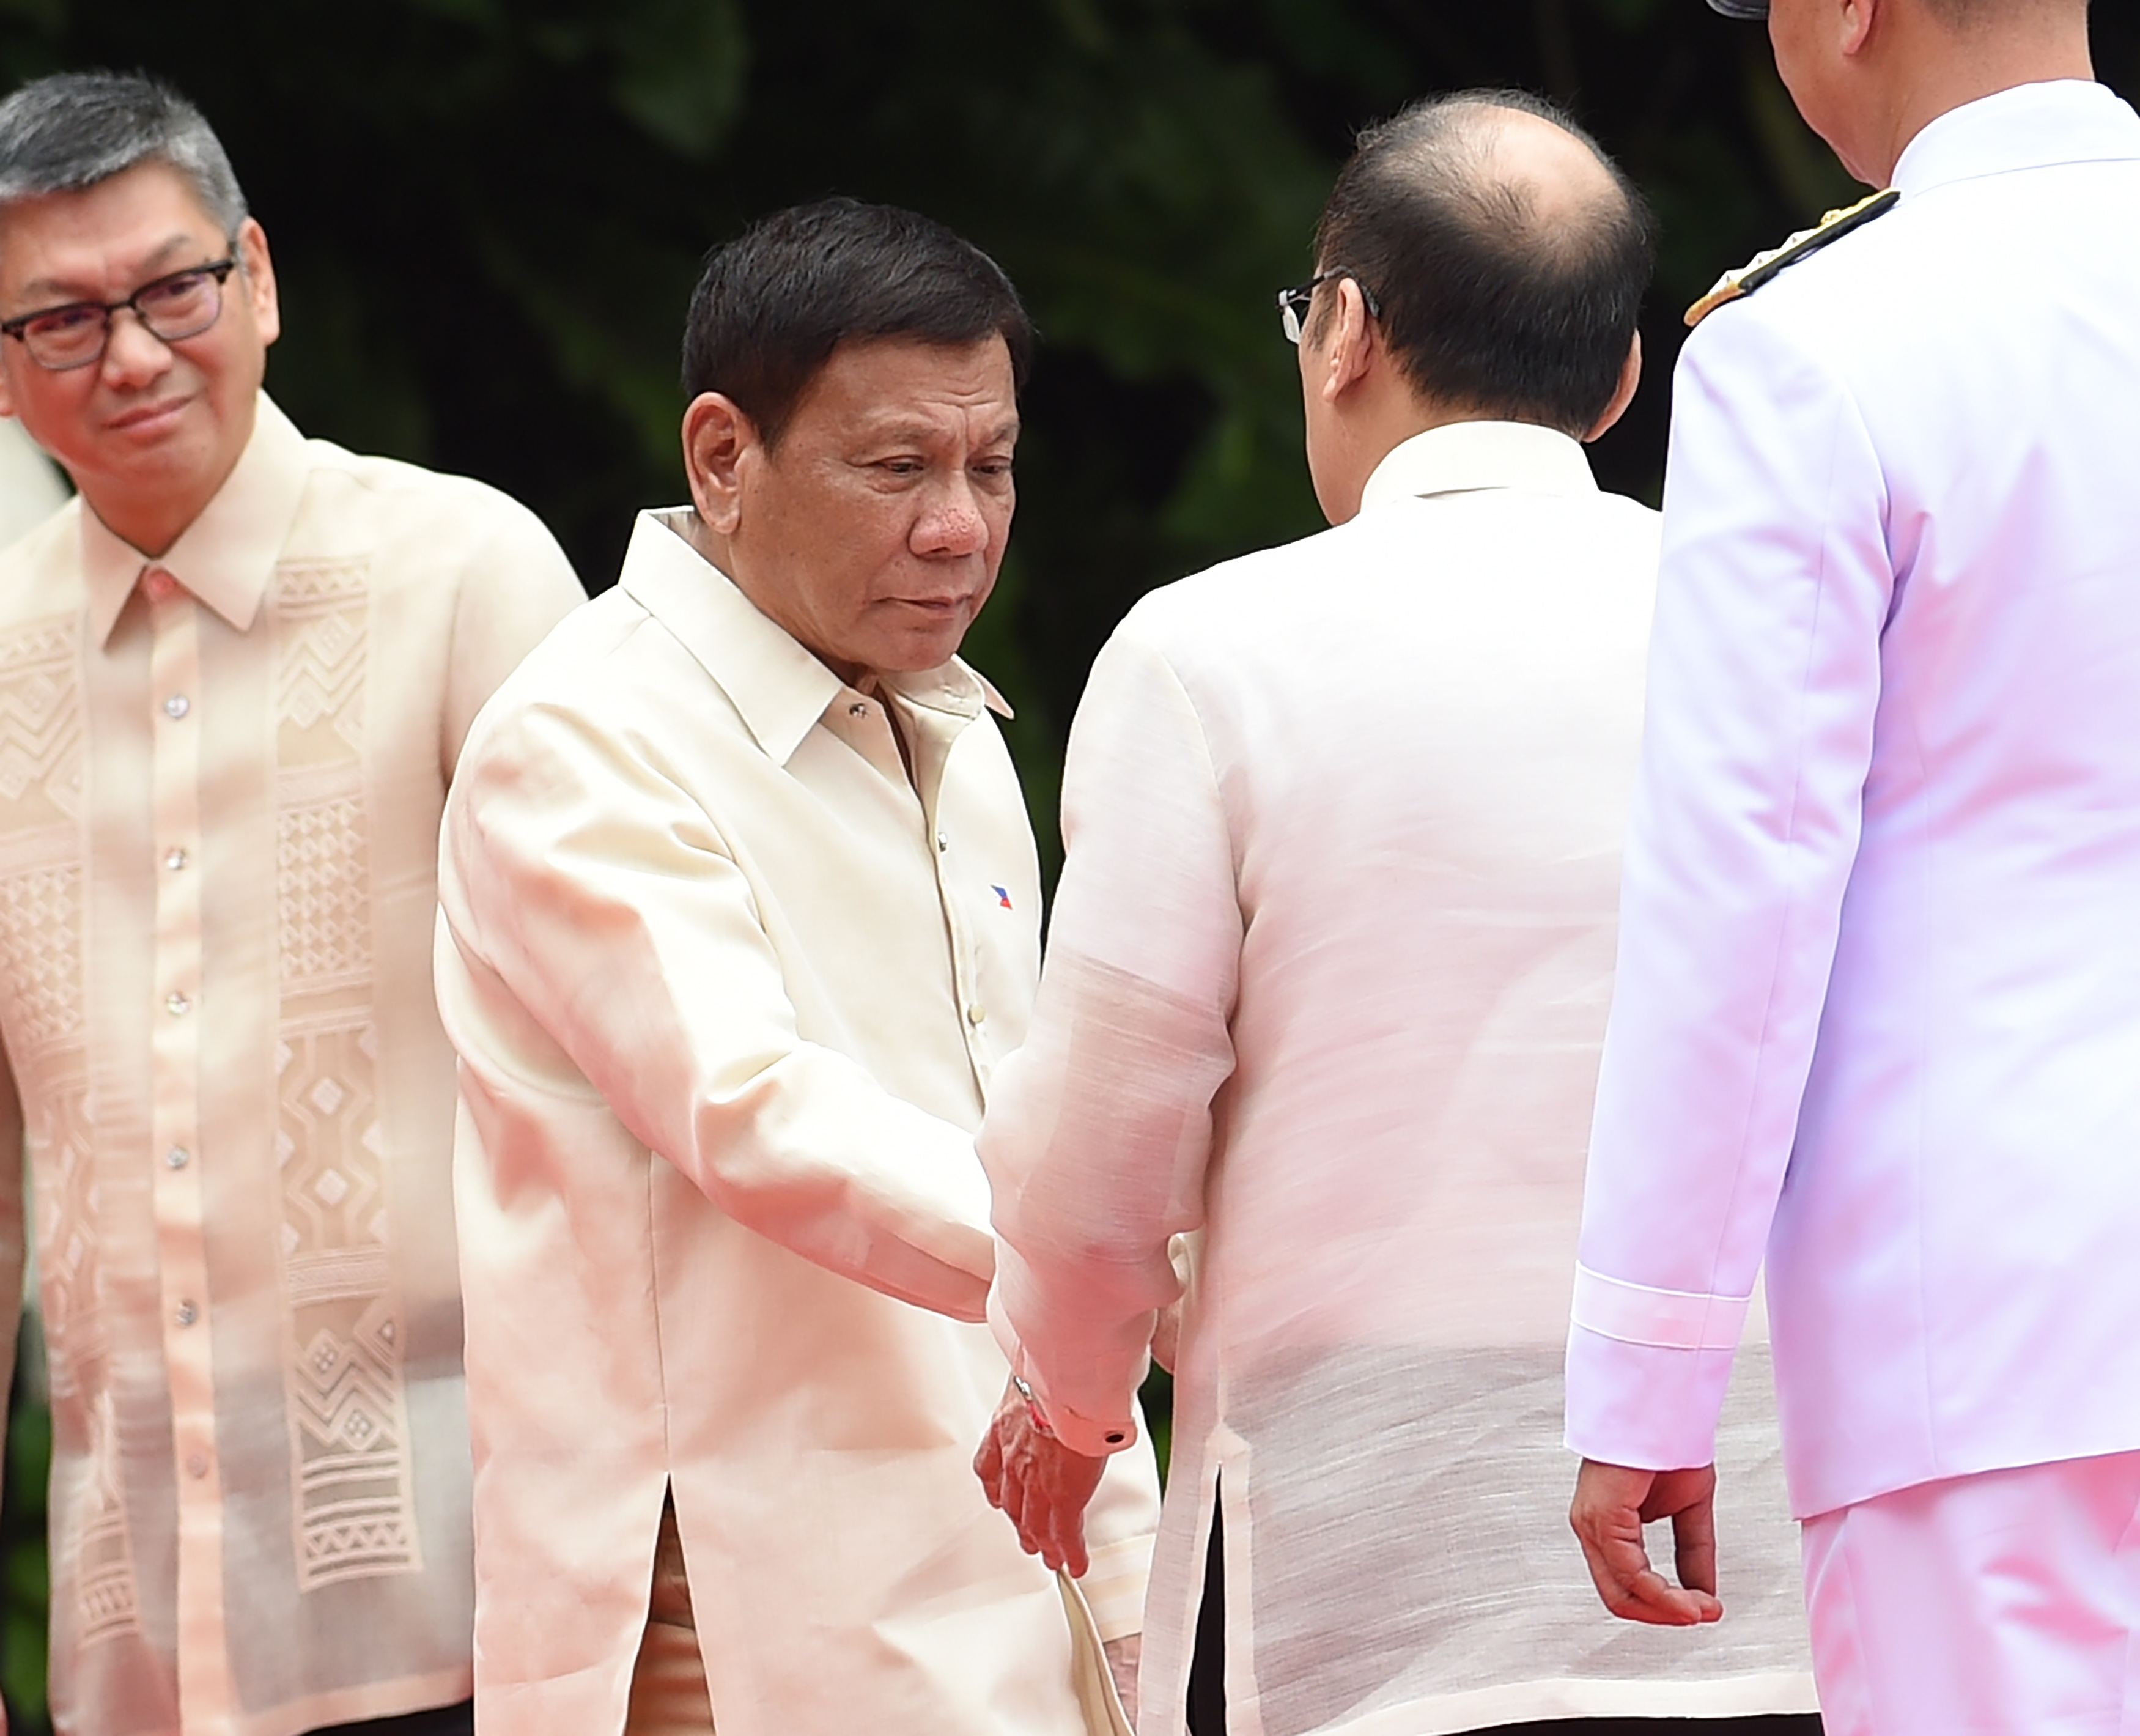 Outgoing Philippines President Benigno Aquino (2nd R) shakes hands with his successor Rodrigo Duterte (center 2nd L) during the departure ceremony for Aquino ahead of the swearing-in ceremony at Malacanang Palace in Manila on June 30, 2016.   Authoritarian firebrand Rodrigo Duterte takes office as Philippine president June 30, promising a ruthless and deeply controversial war on crime as the chief focus of his six-year term. / AFP PHOTO / TED ALJIBE